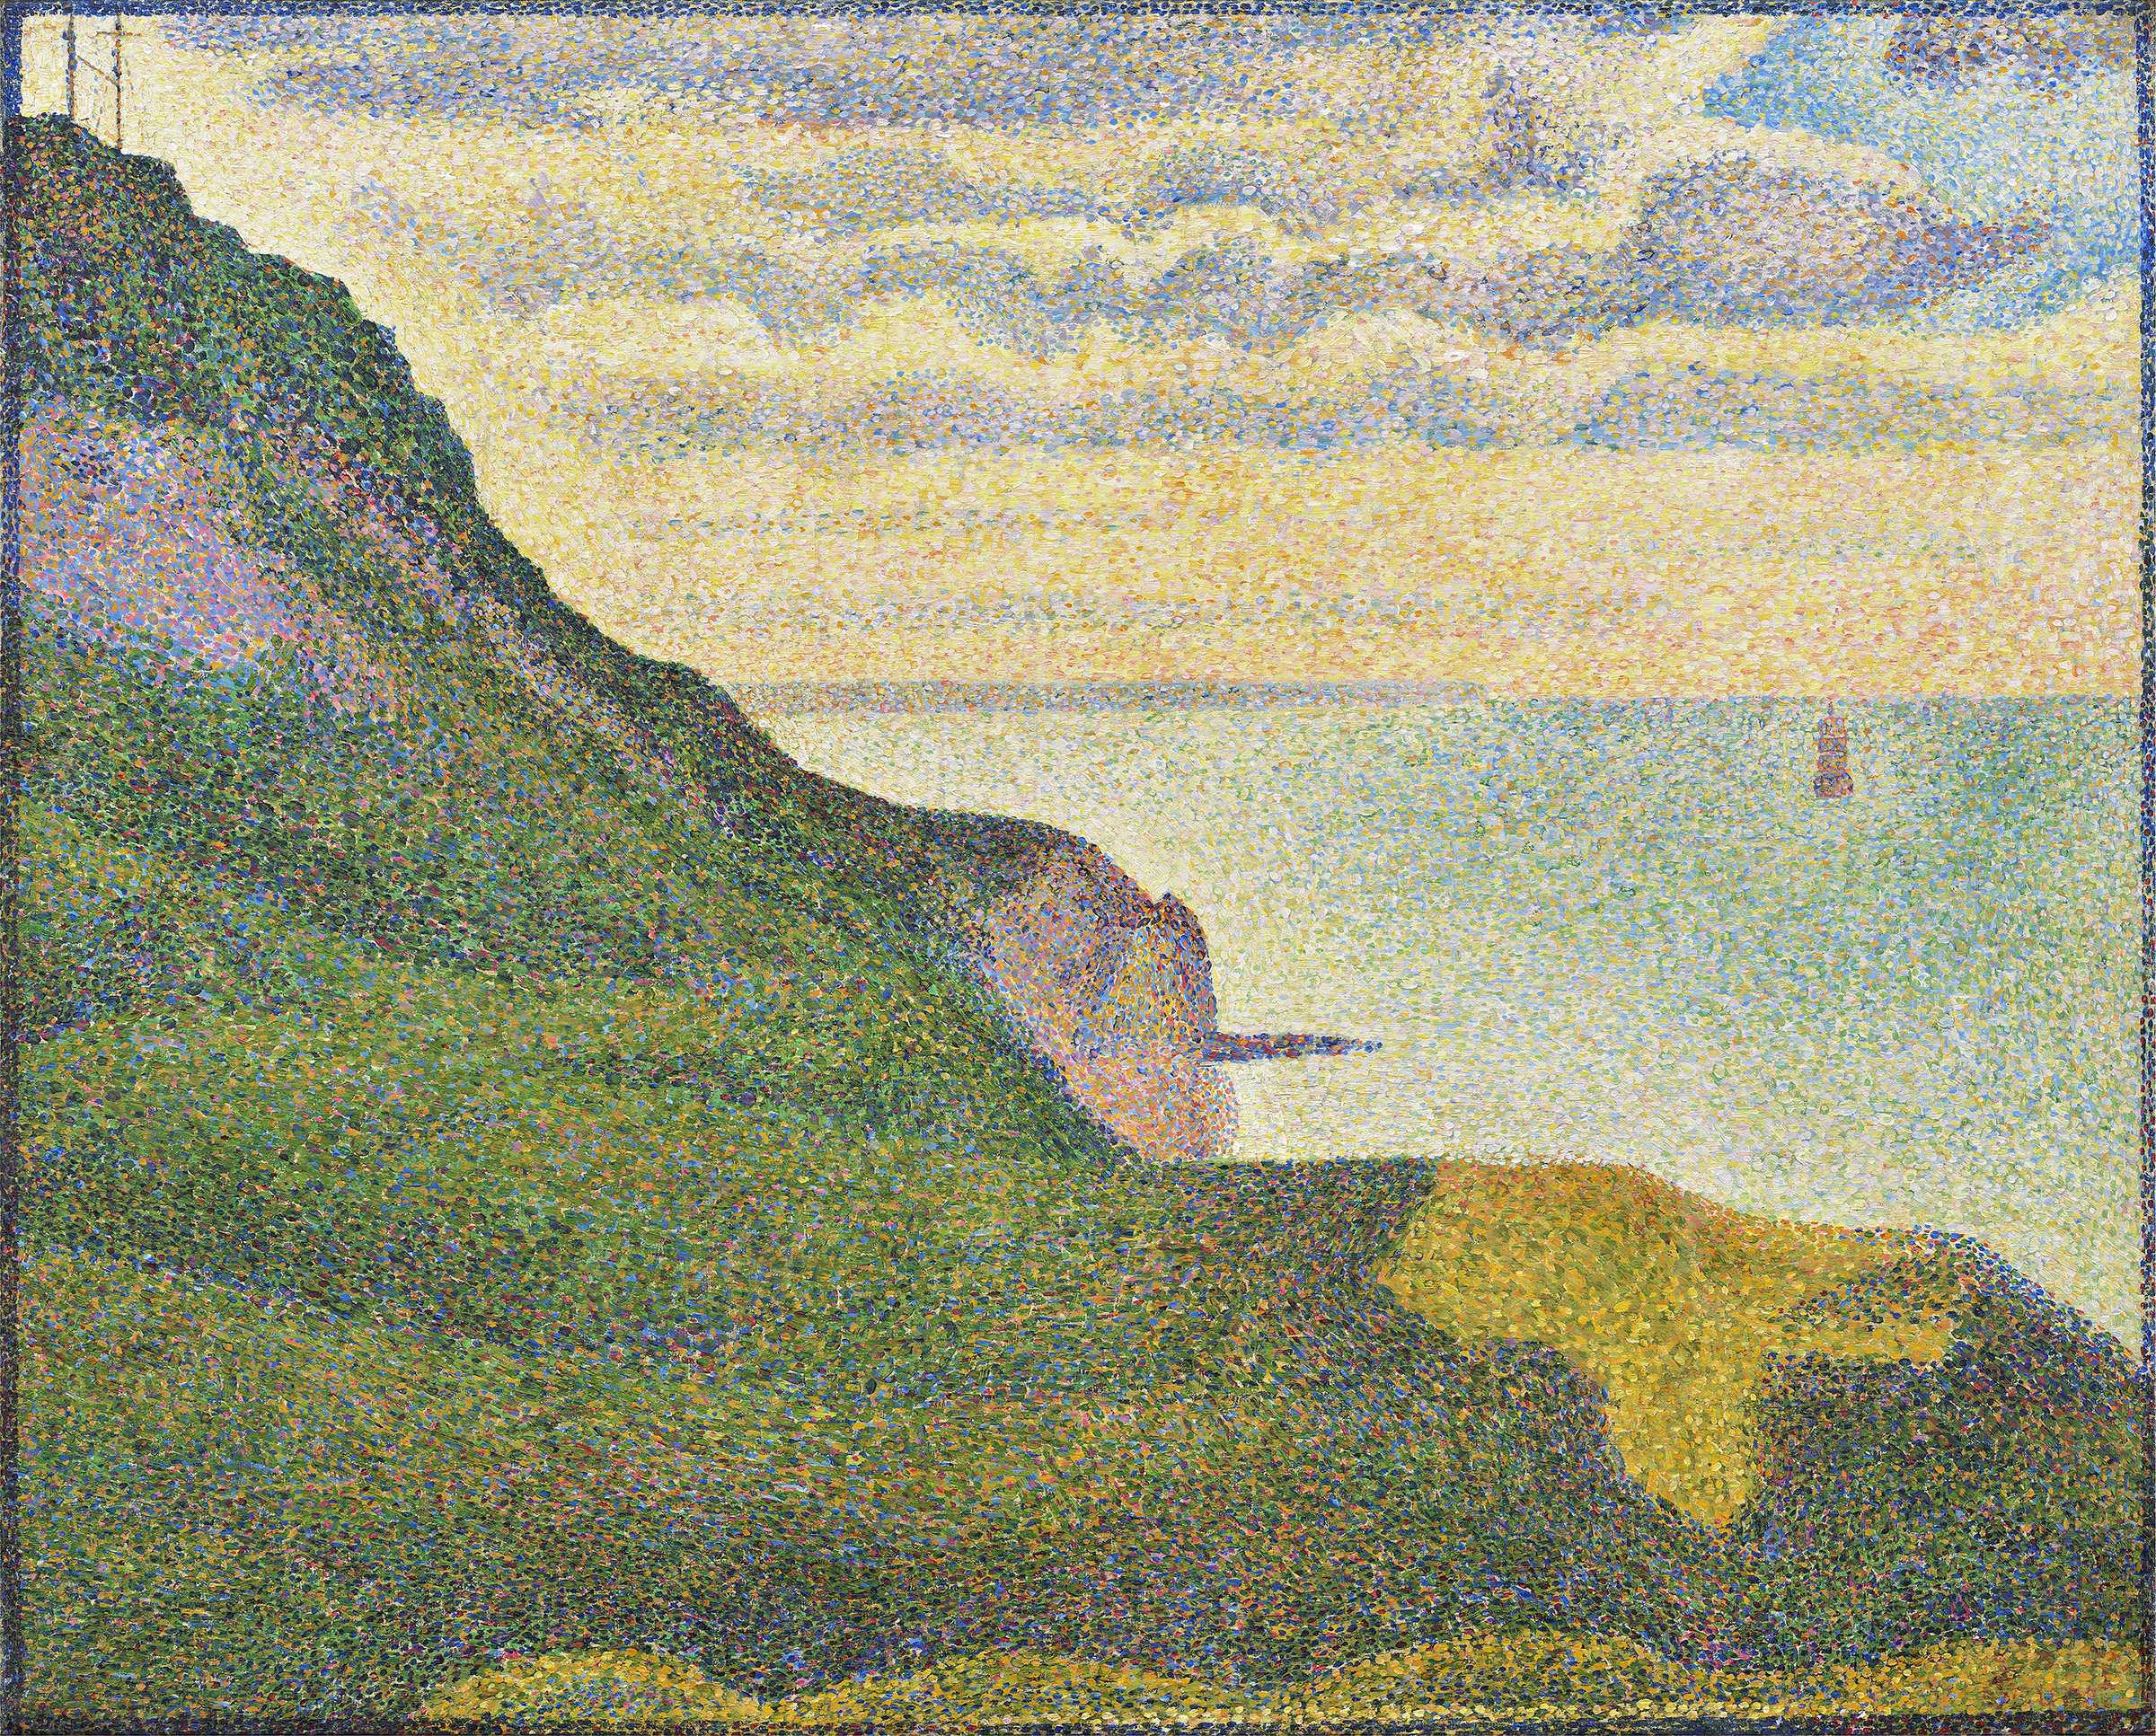 Find out more about Georges Seurat - Seascape At Port-En-Bessin,Normandy